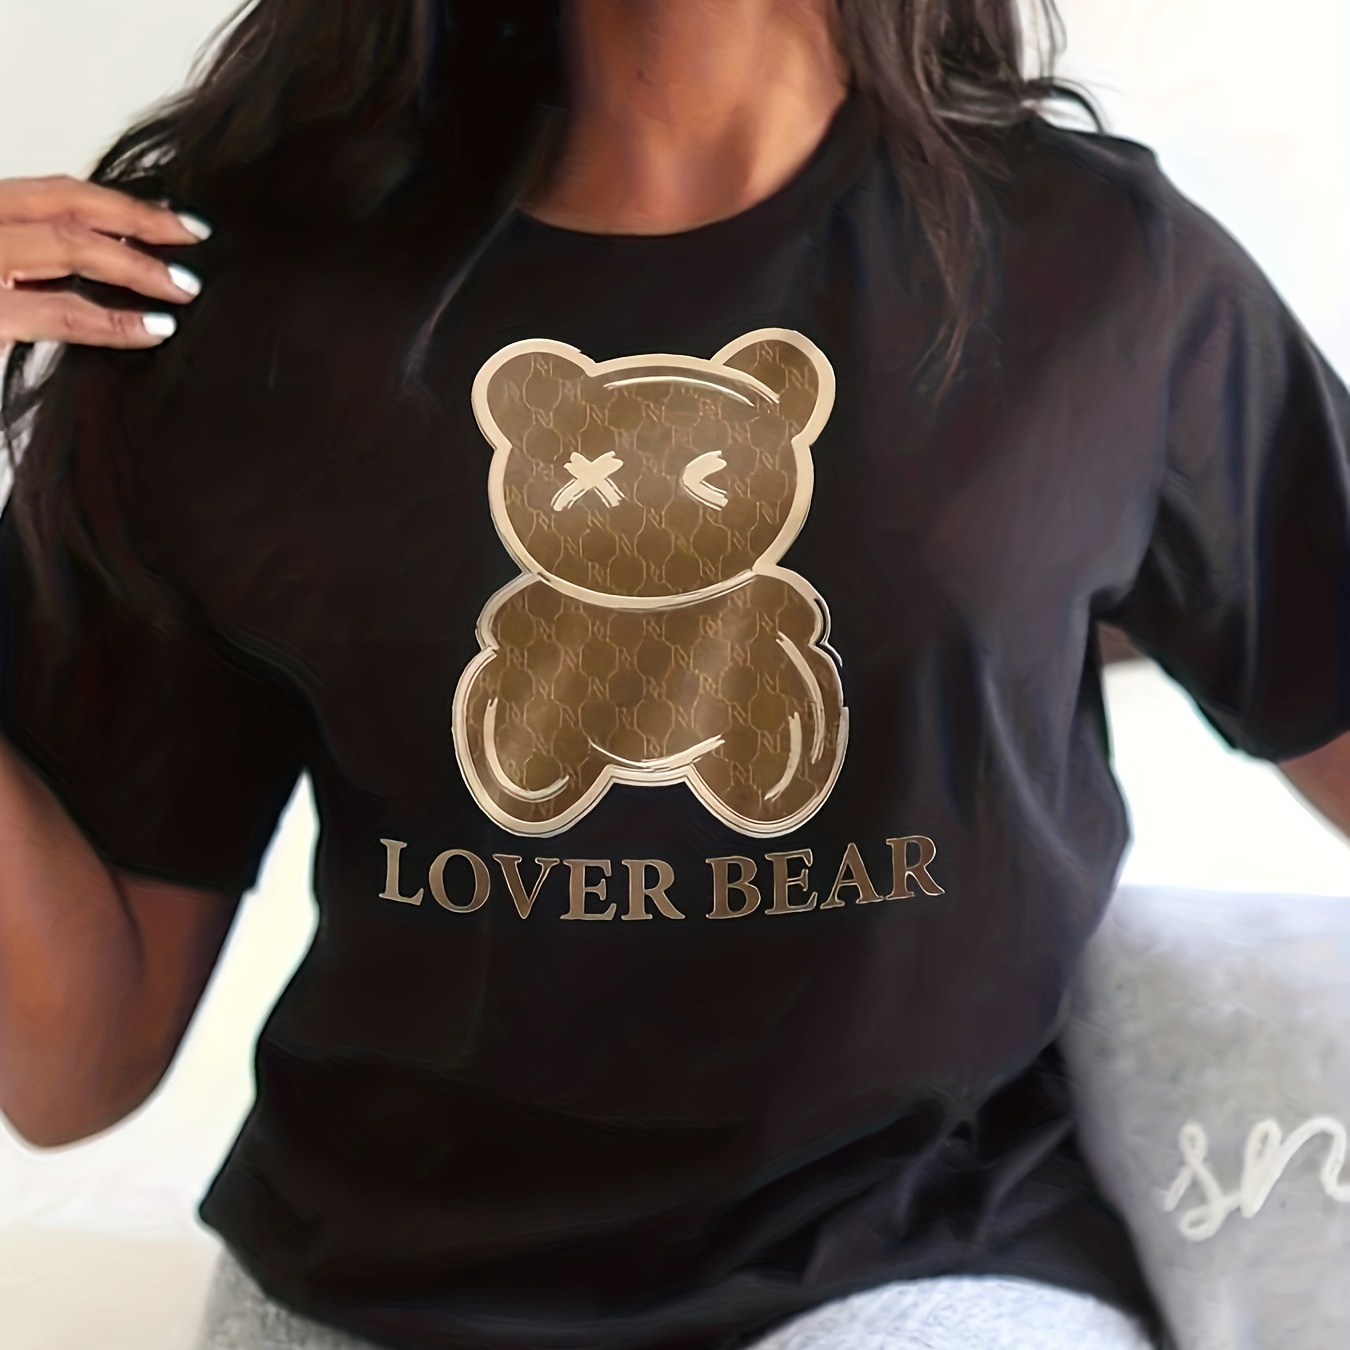 

Lover Bear Print T-shirt, Short Sleeve Crew Neck Casual Top For Summer & Spring, Women's Clothing